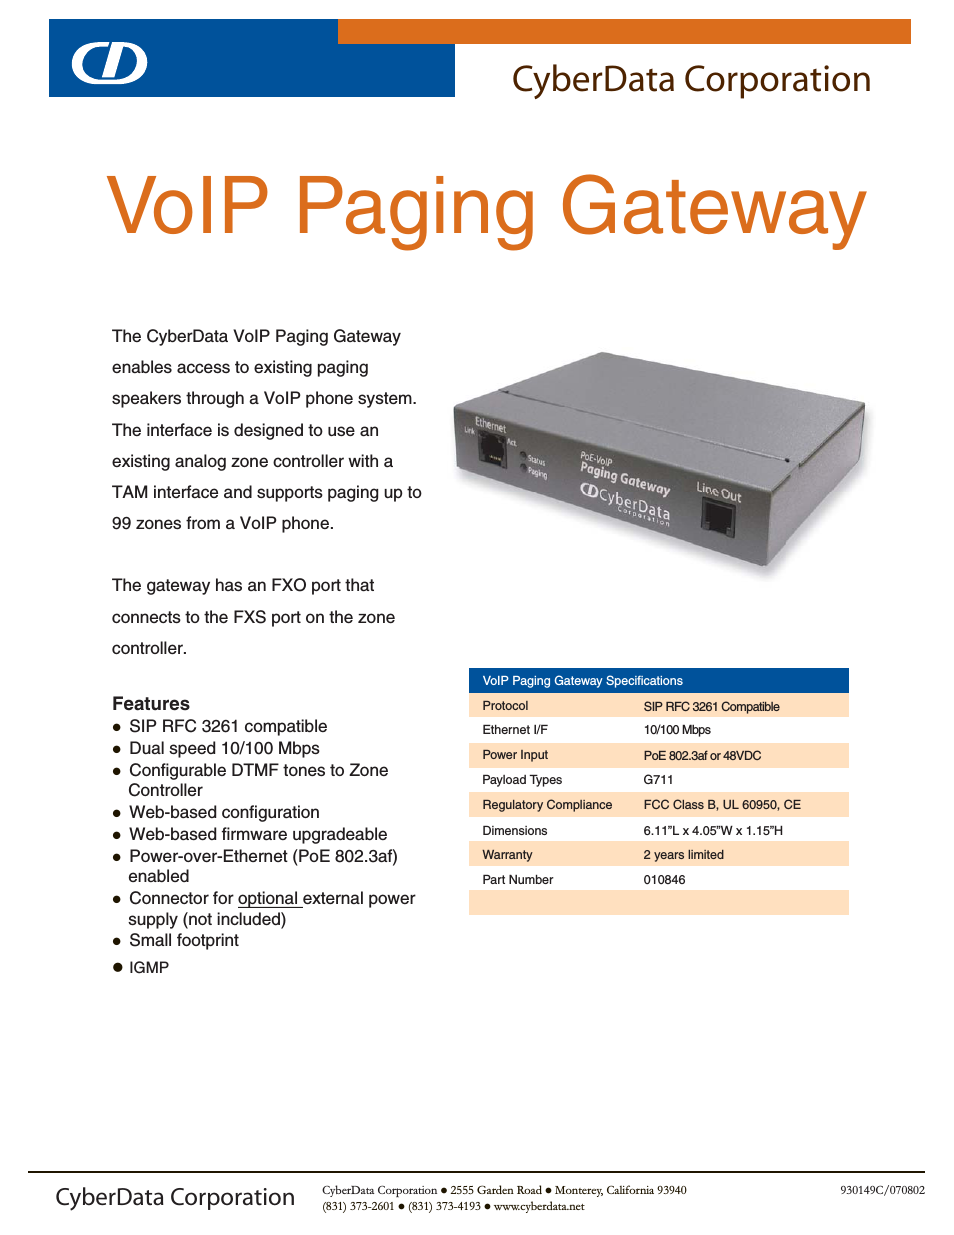 VoIP Paging Gateway